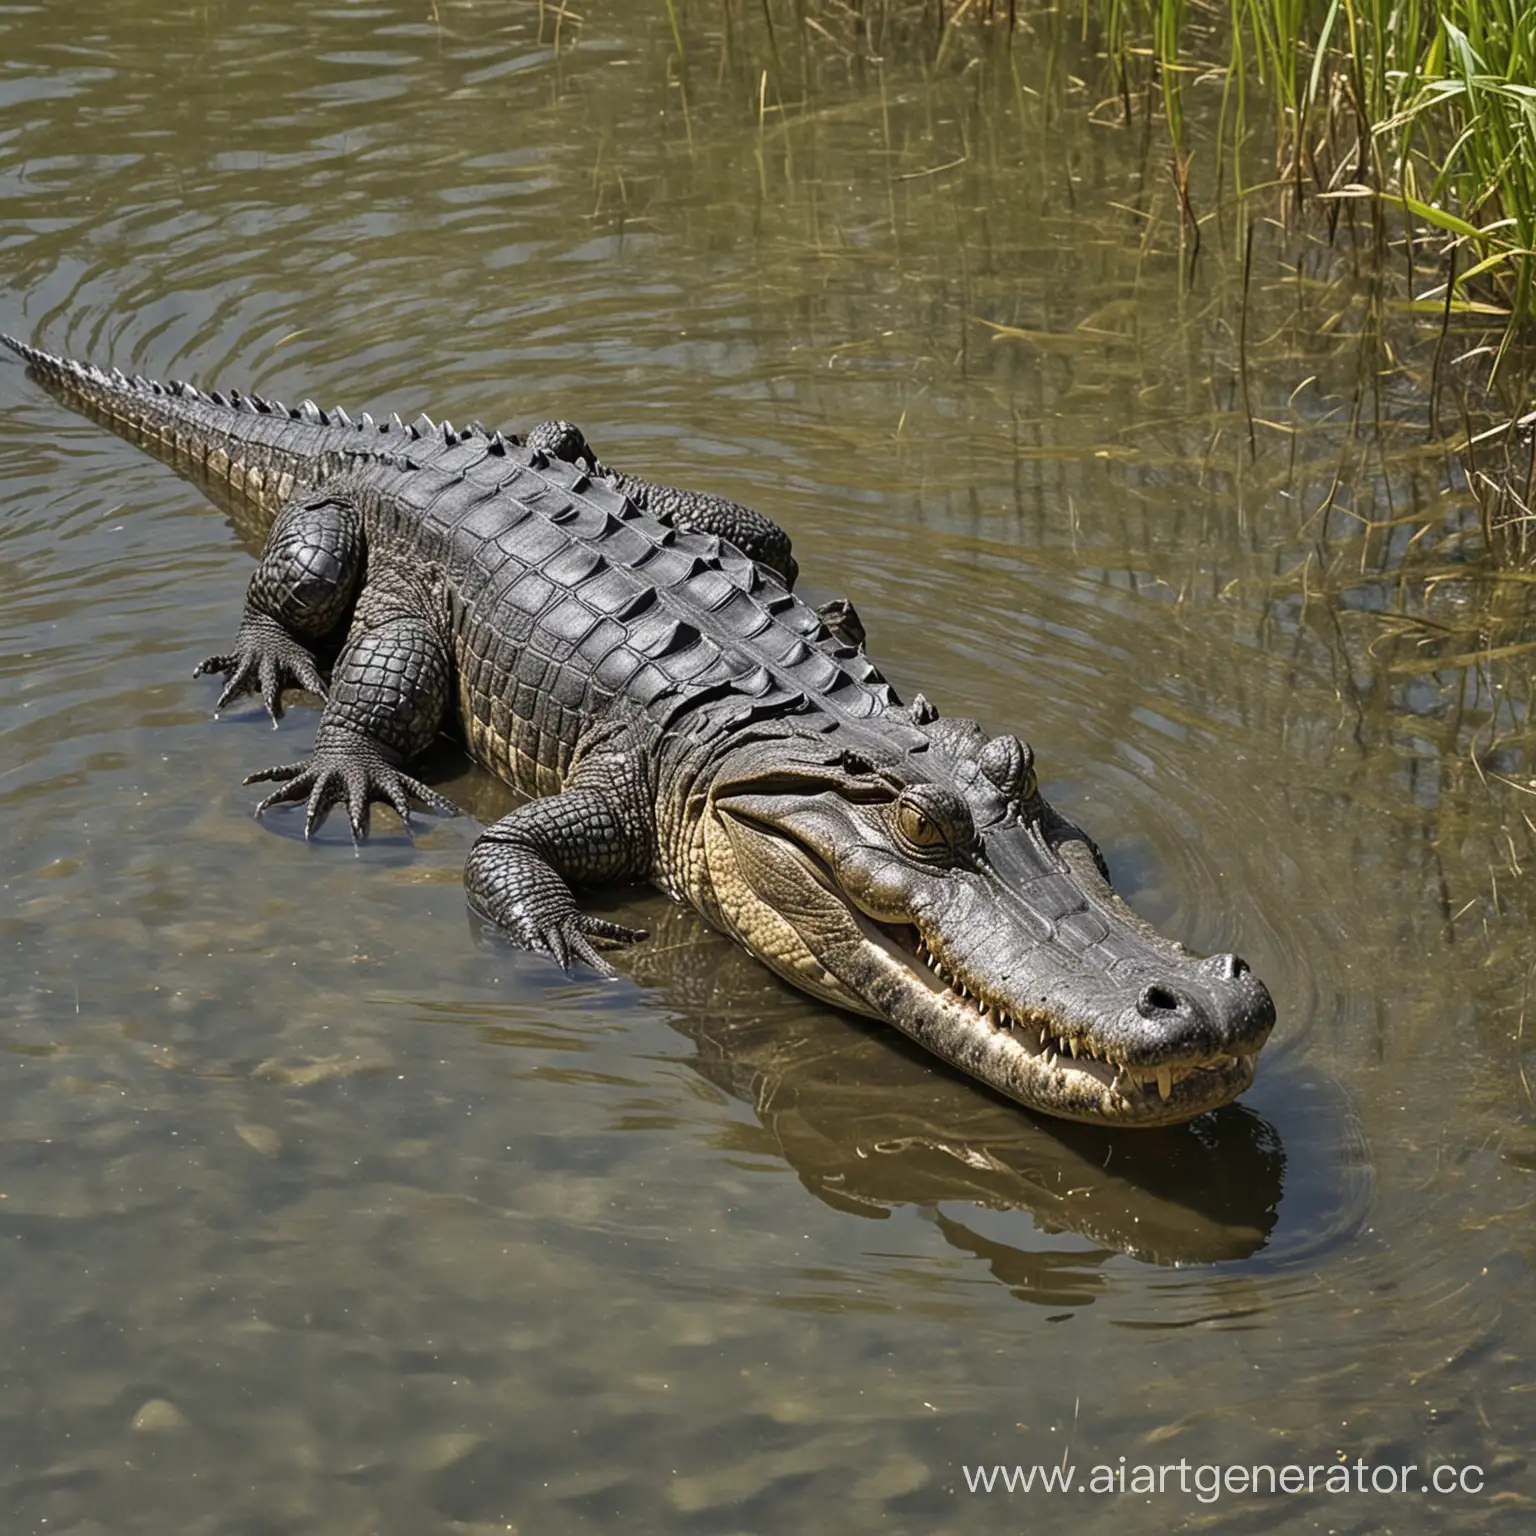 Alligator-Basking-in-the-Sun-on-a-Riverbank